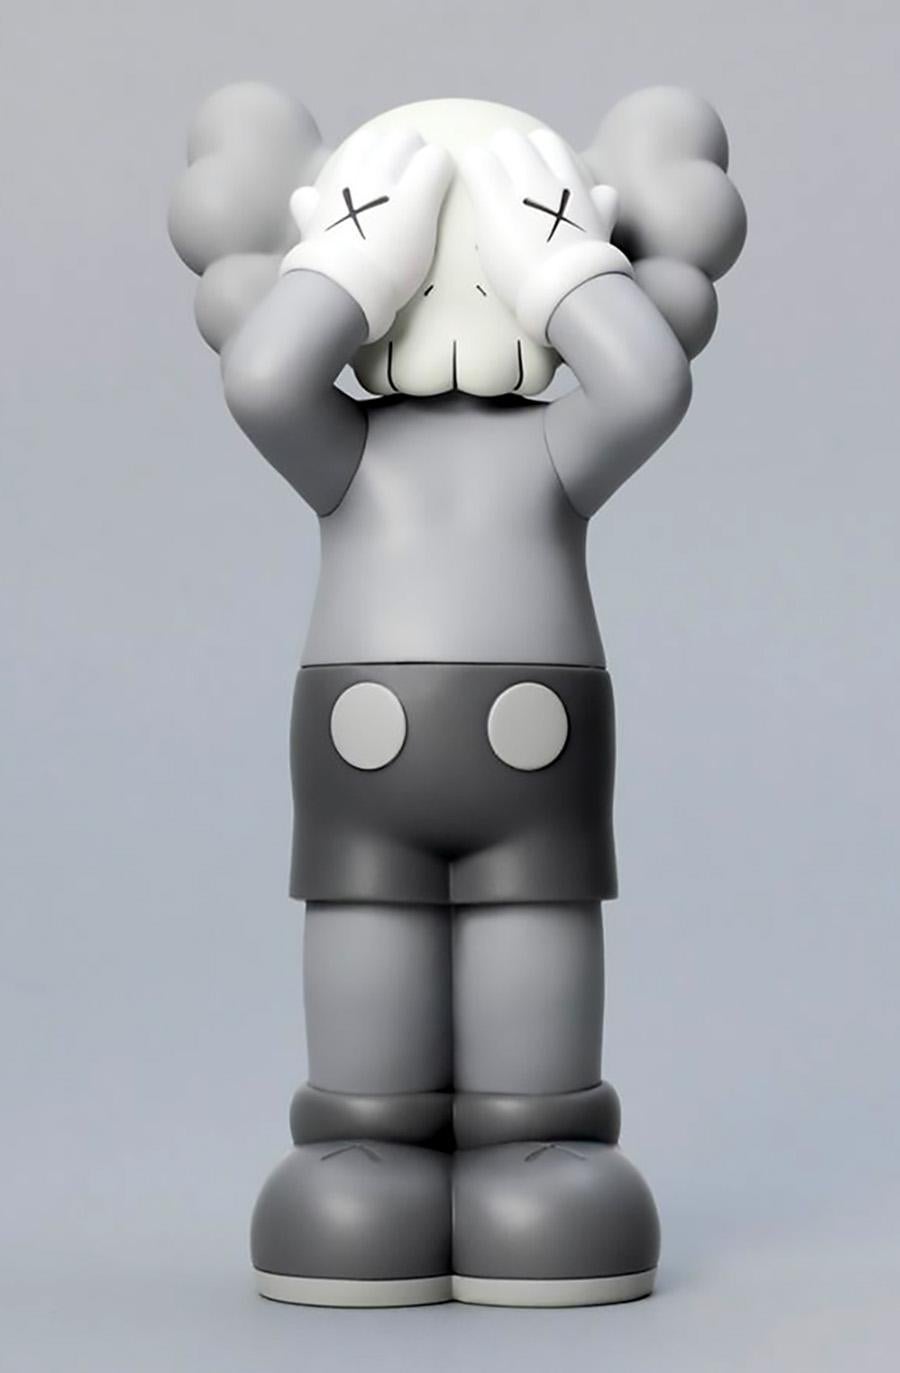 KAWS: HOLIDAY United Kingdom: Complete Set of 3 works (KAWS UK): 
KAWS' signature character COMPANION presented in an upright standing position with its eyes covered. 3 individual works (black, brown, & grey), each new in their original packaging -